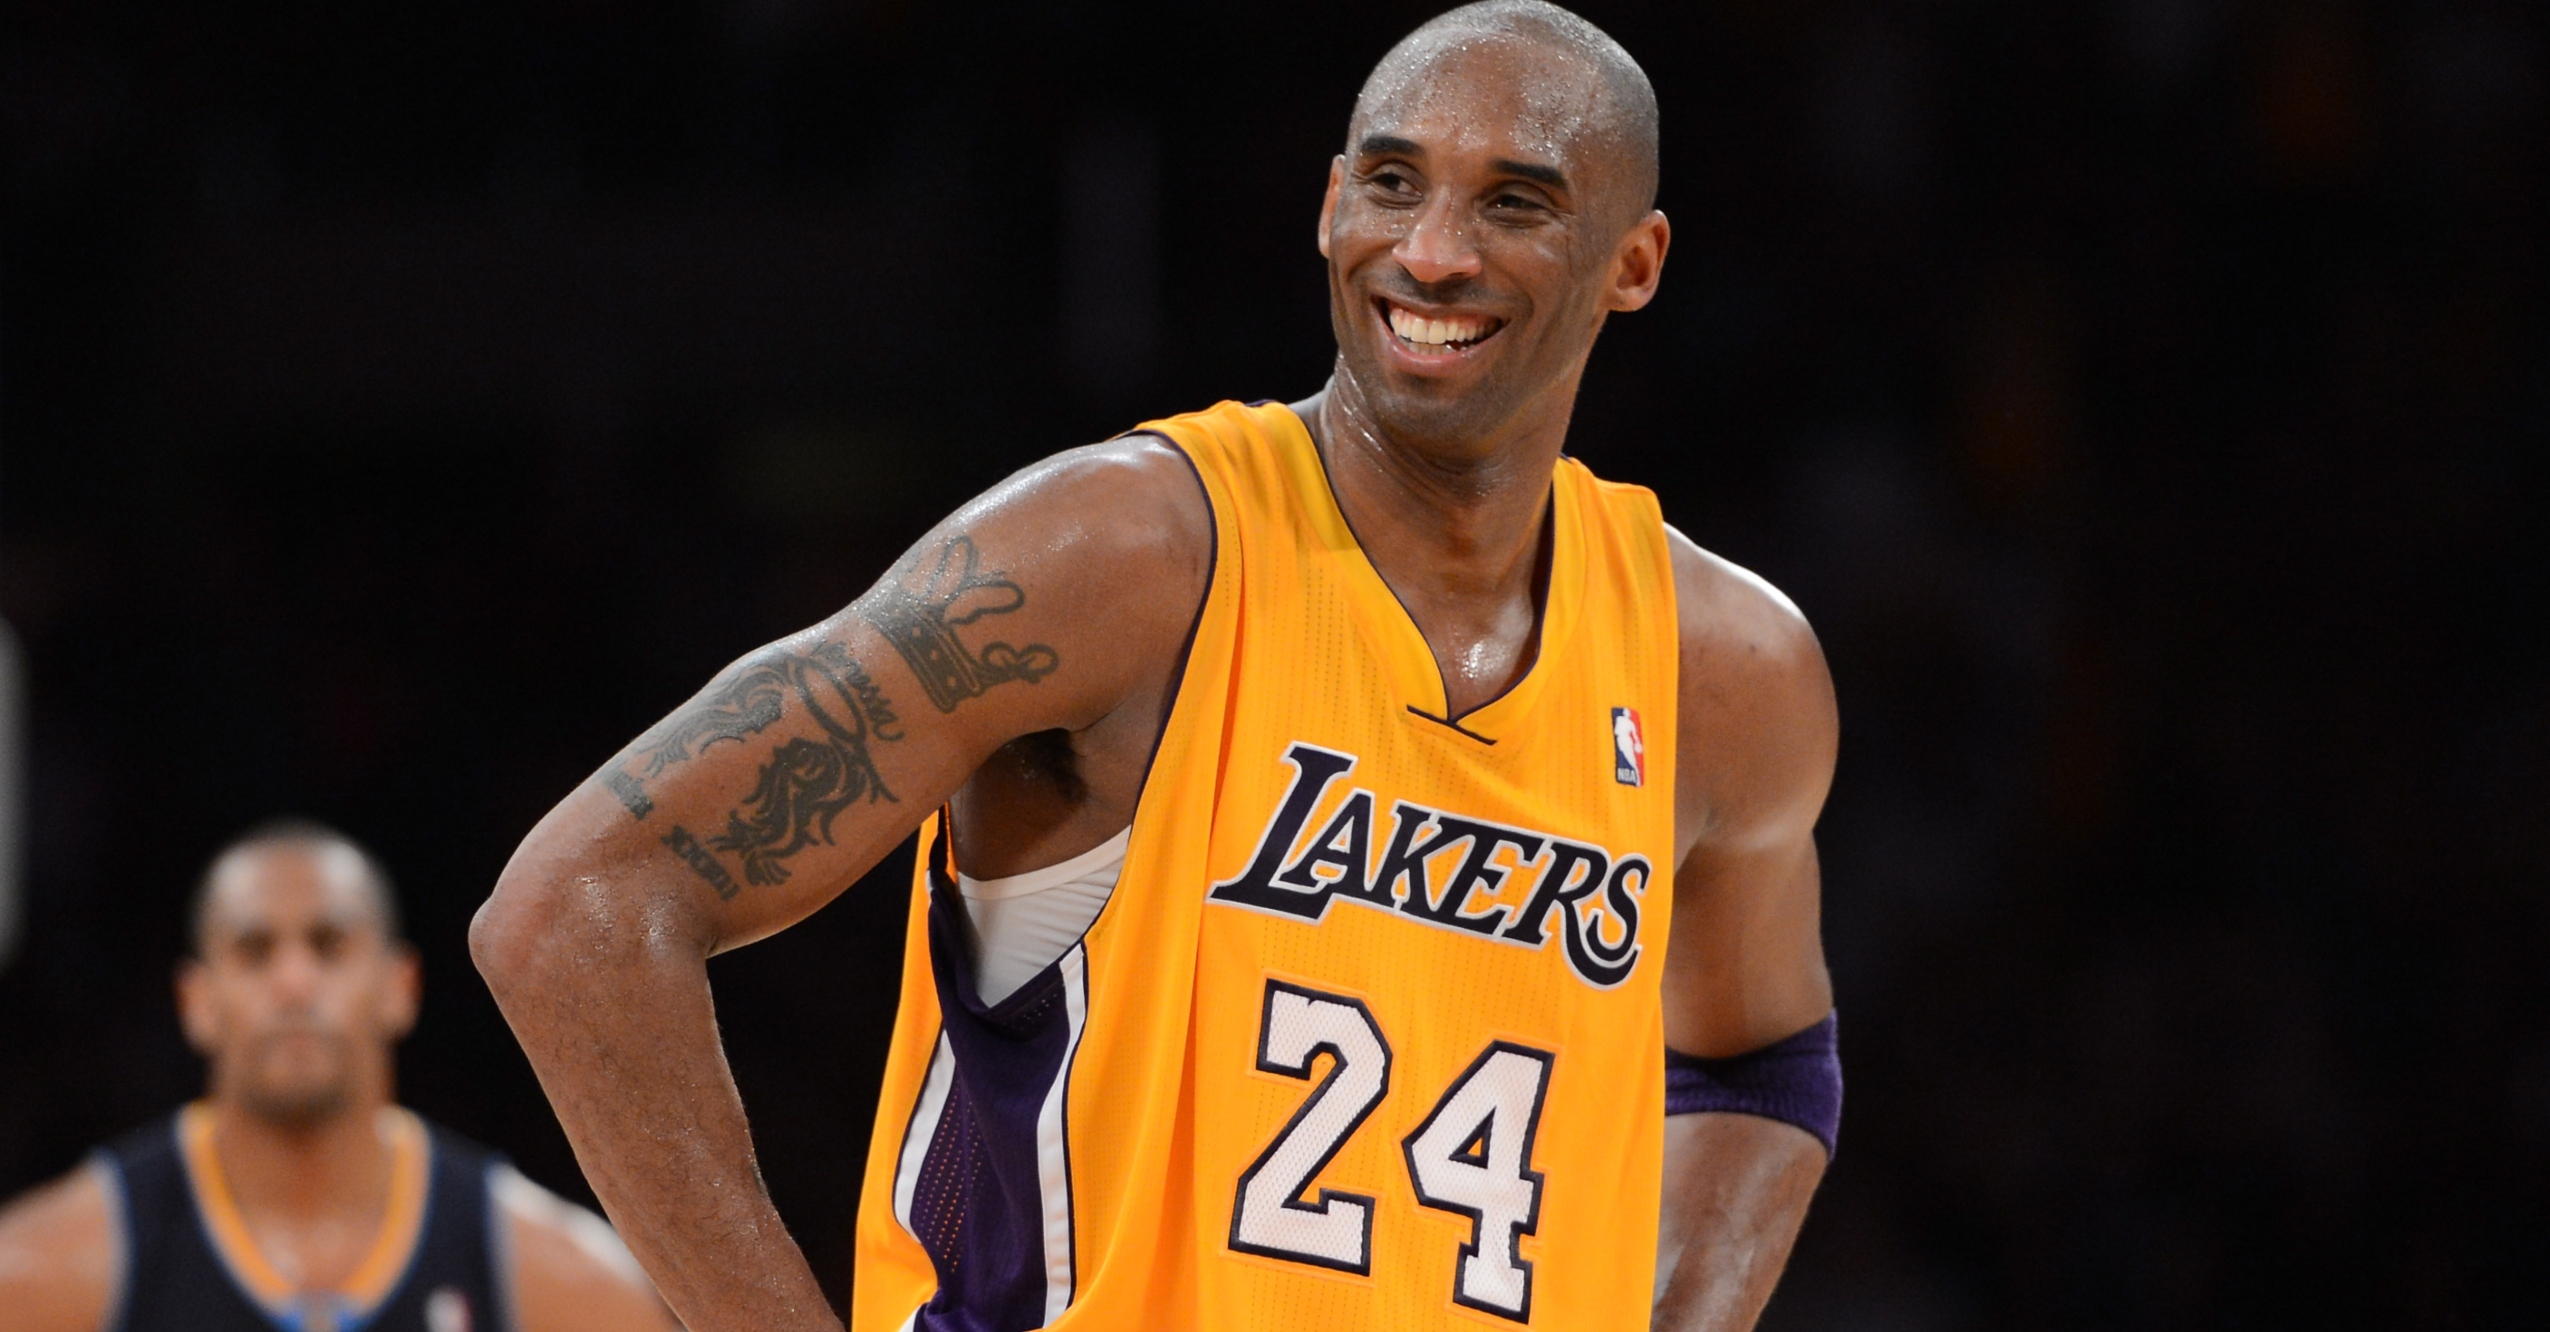 Iconic Kobe Bryant jersey up for auction